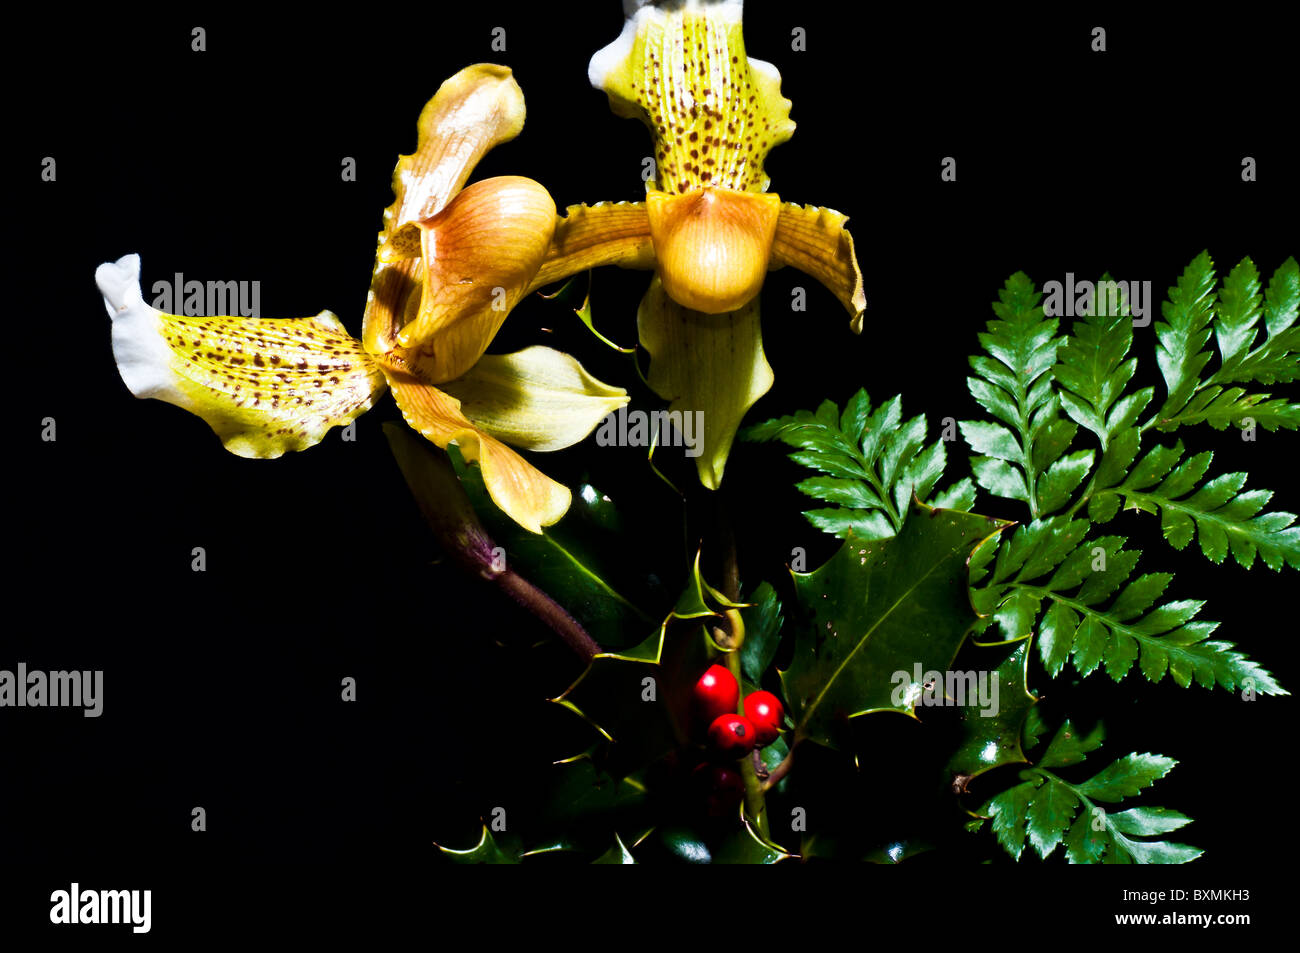 orchids  paphiopedilum (flower exotic) portraits still-life horizontally on a black background between ferns and mistletoe Stock Photo